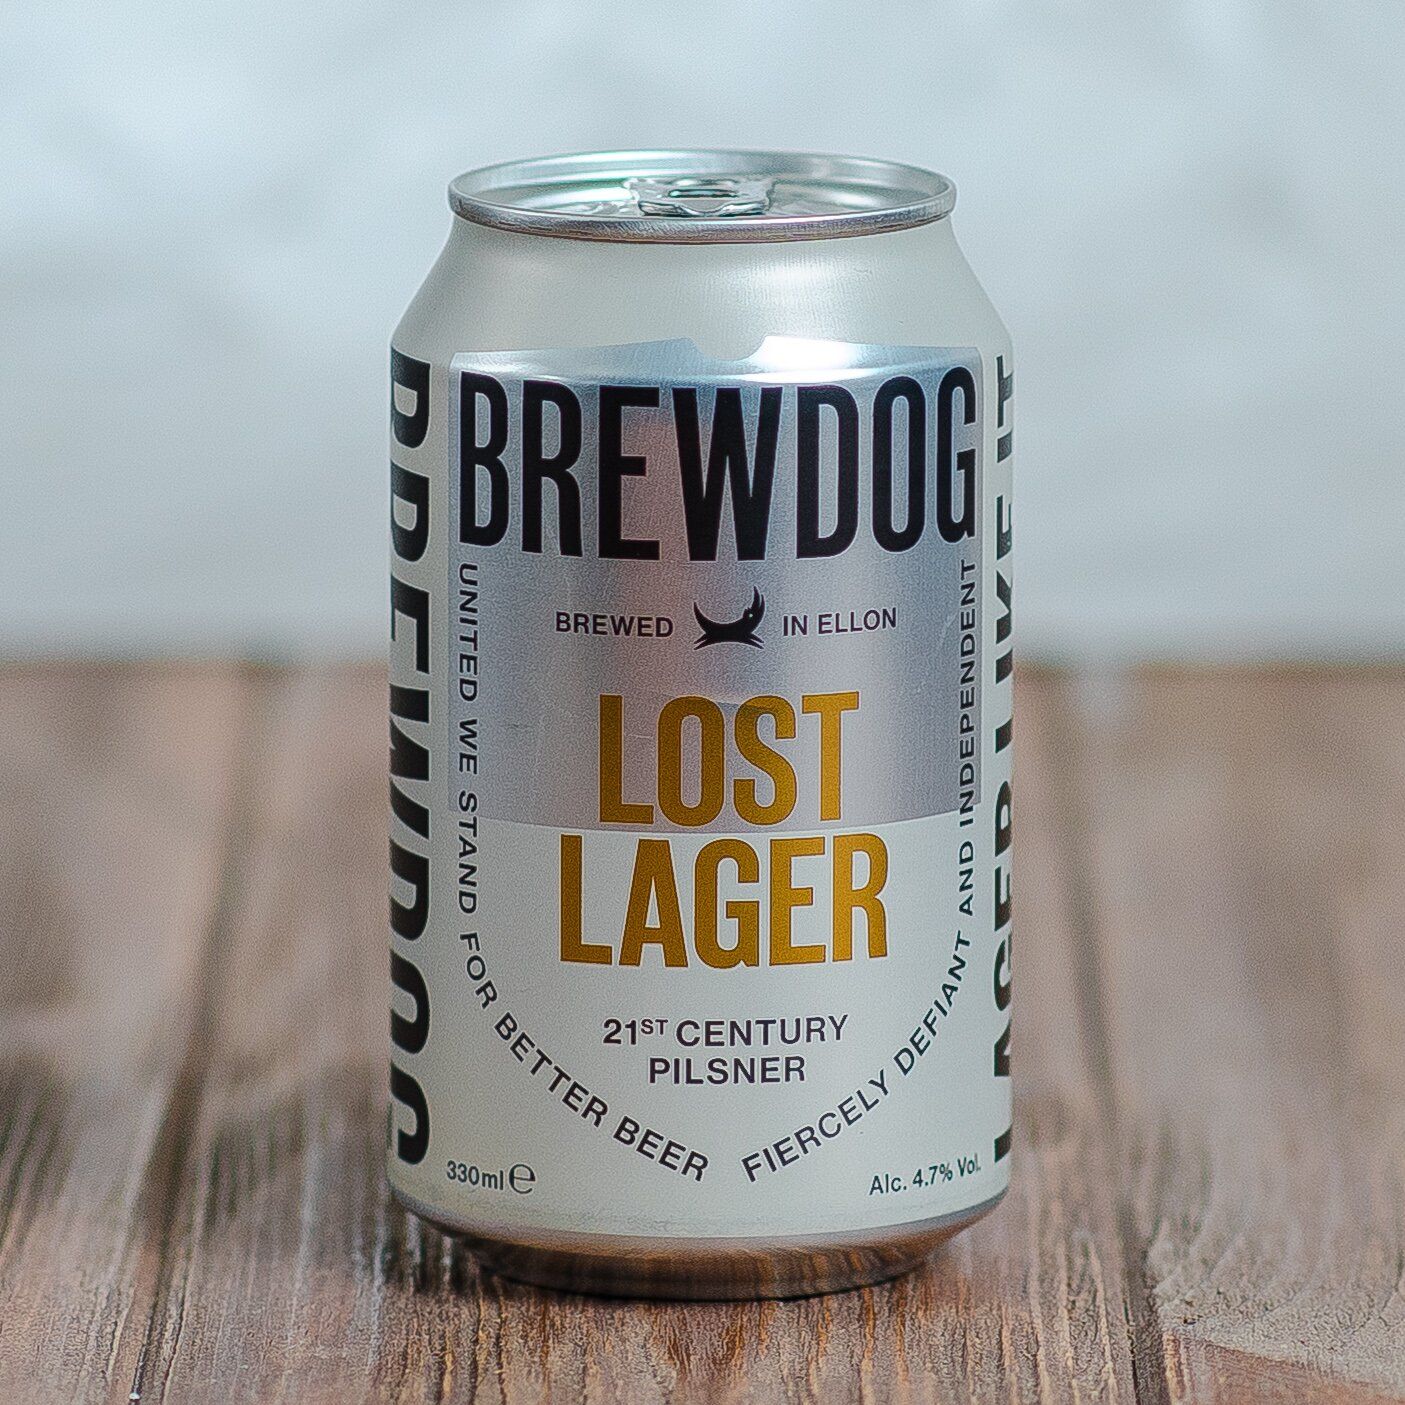 buy-brewdog-lost-lager-from-brewdog-scotland-with-delivery-in-ukraine